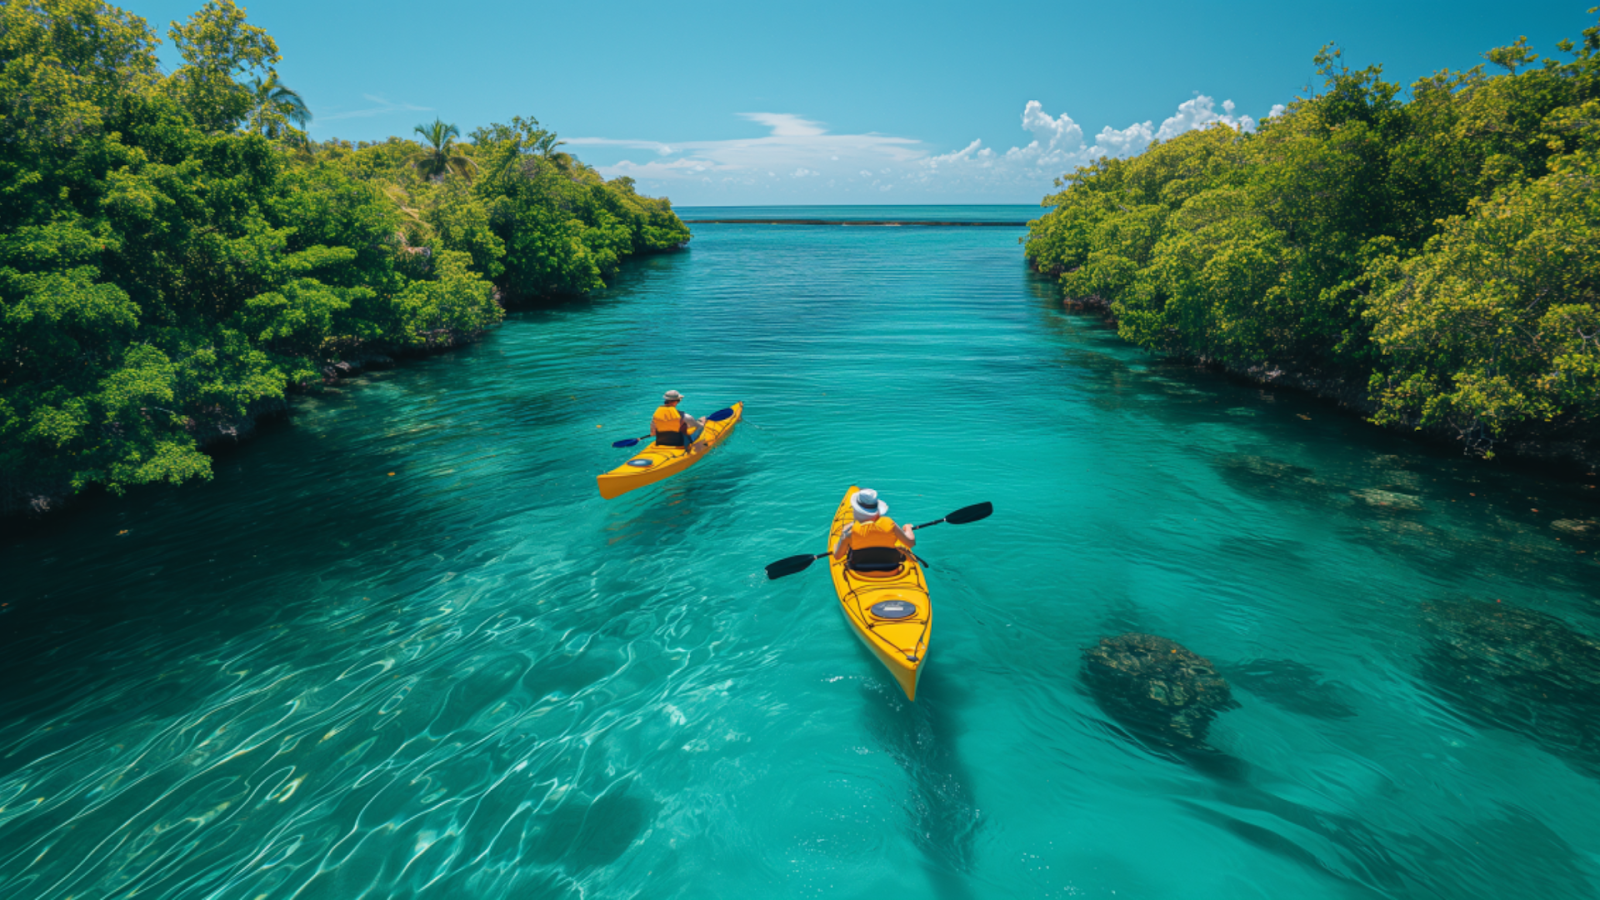 Kayakers gliding through the serene, crystal-clear waters of Biscayne National Park